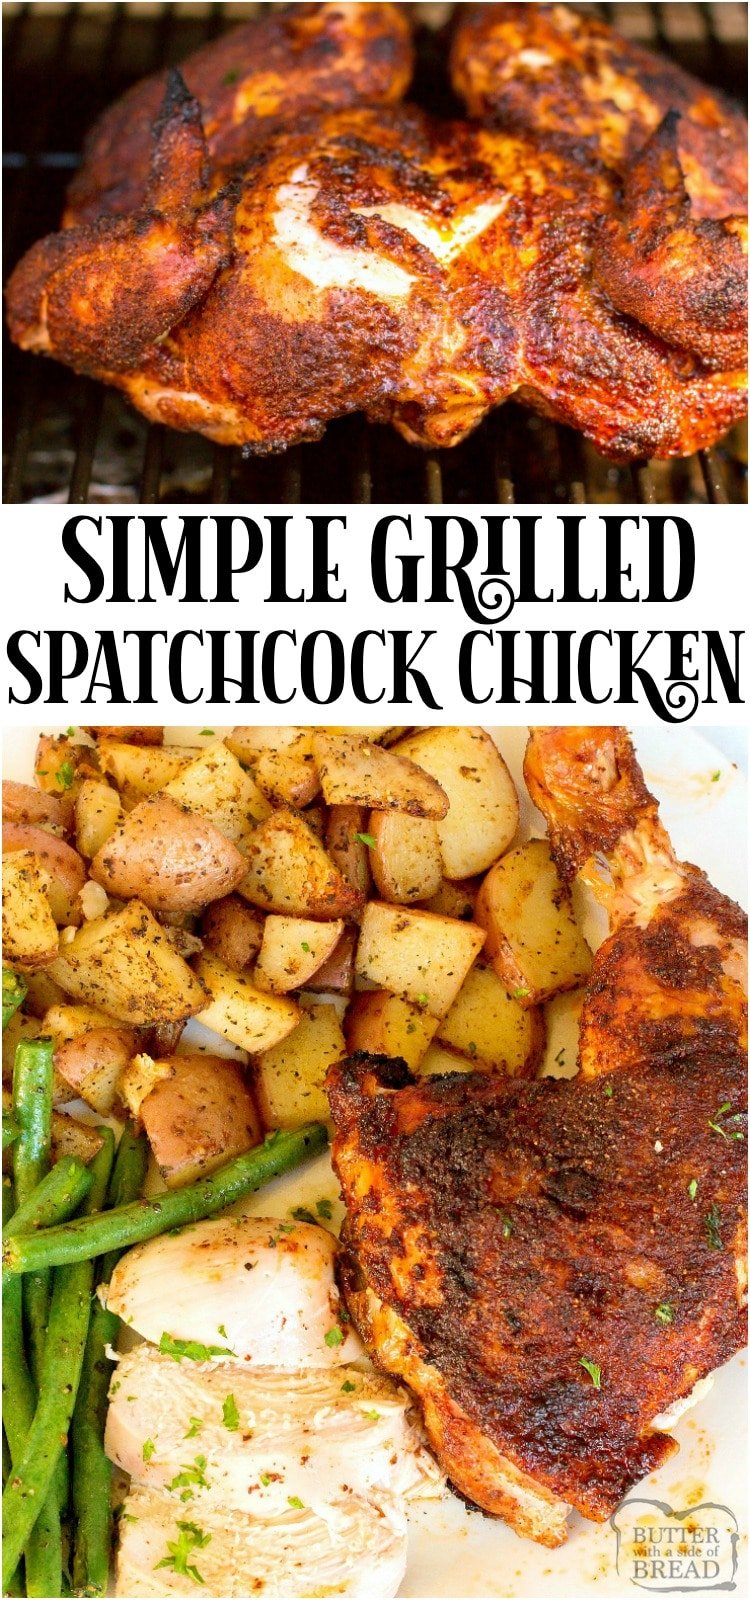 Grilled Spatchcock Chicken Recipe for tender, flavorful chicken that cooks evenly! Shows how to spatchcock a chicken & why it delivers moist chicken with incredible flavor. #spatchcock #chicken #grilling #grilledchicken #bbq #chicken #recipe #dinner from BUTTER WITH A SIDE OF BREAD